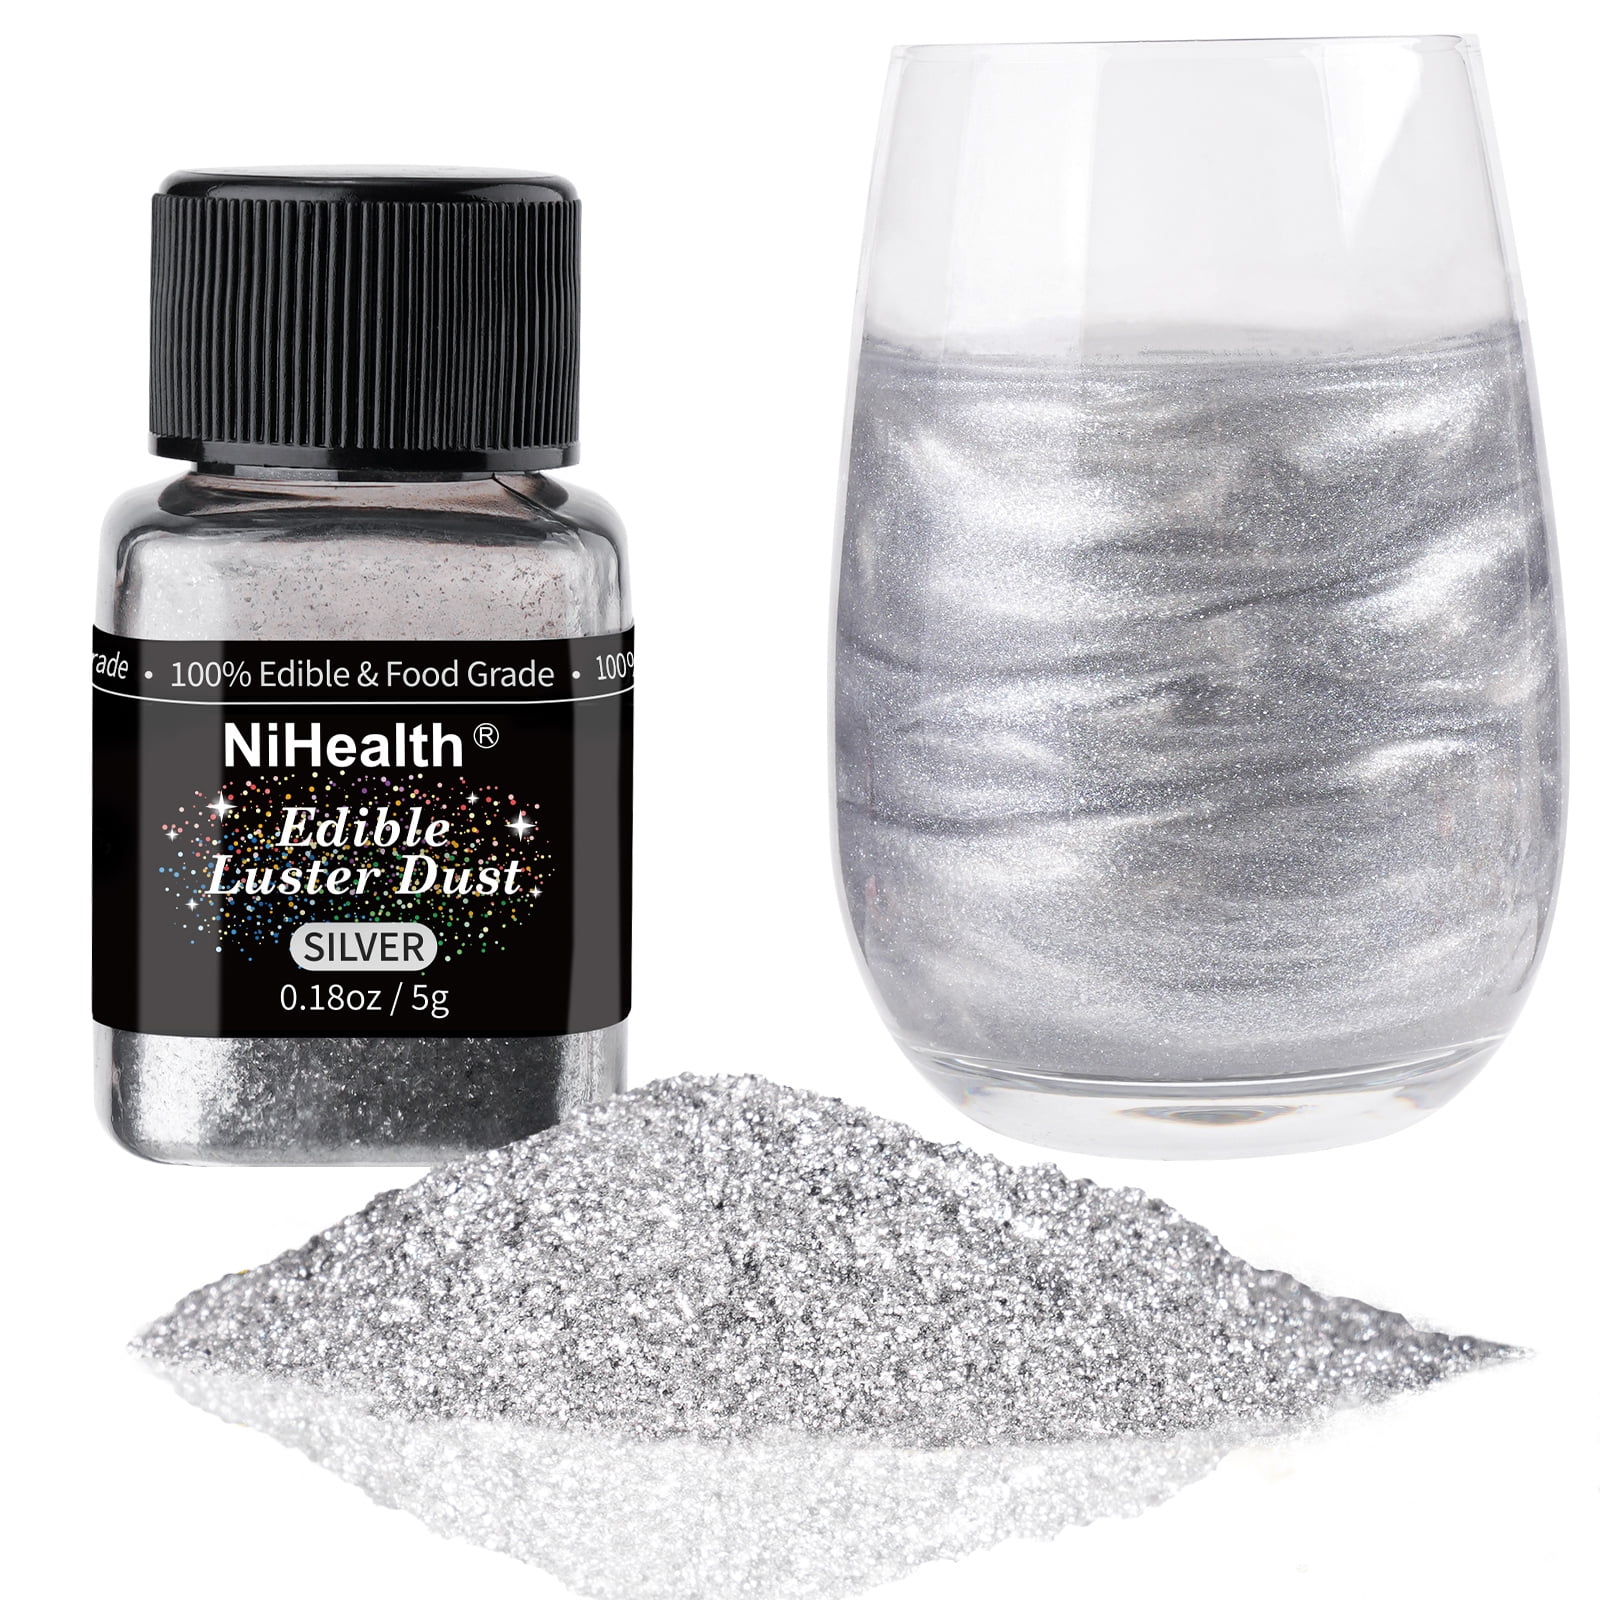 DIY Mica Glitter Spray: Make Your Own Glimmer Mists for Crafting